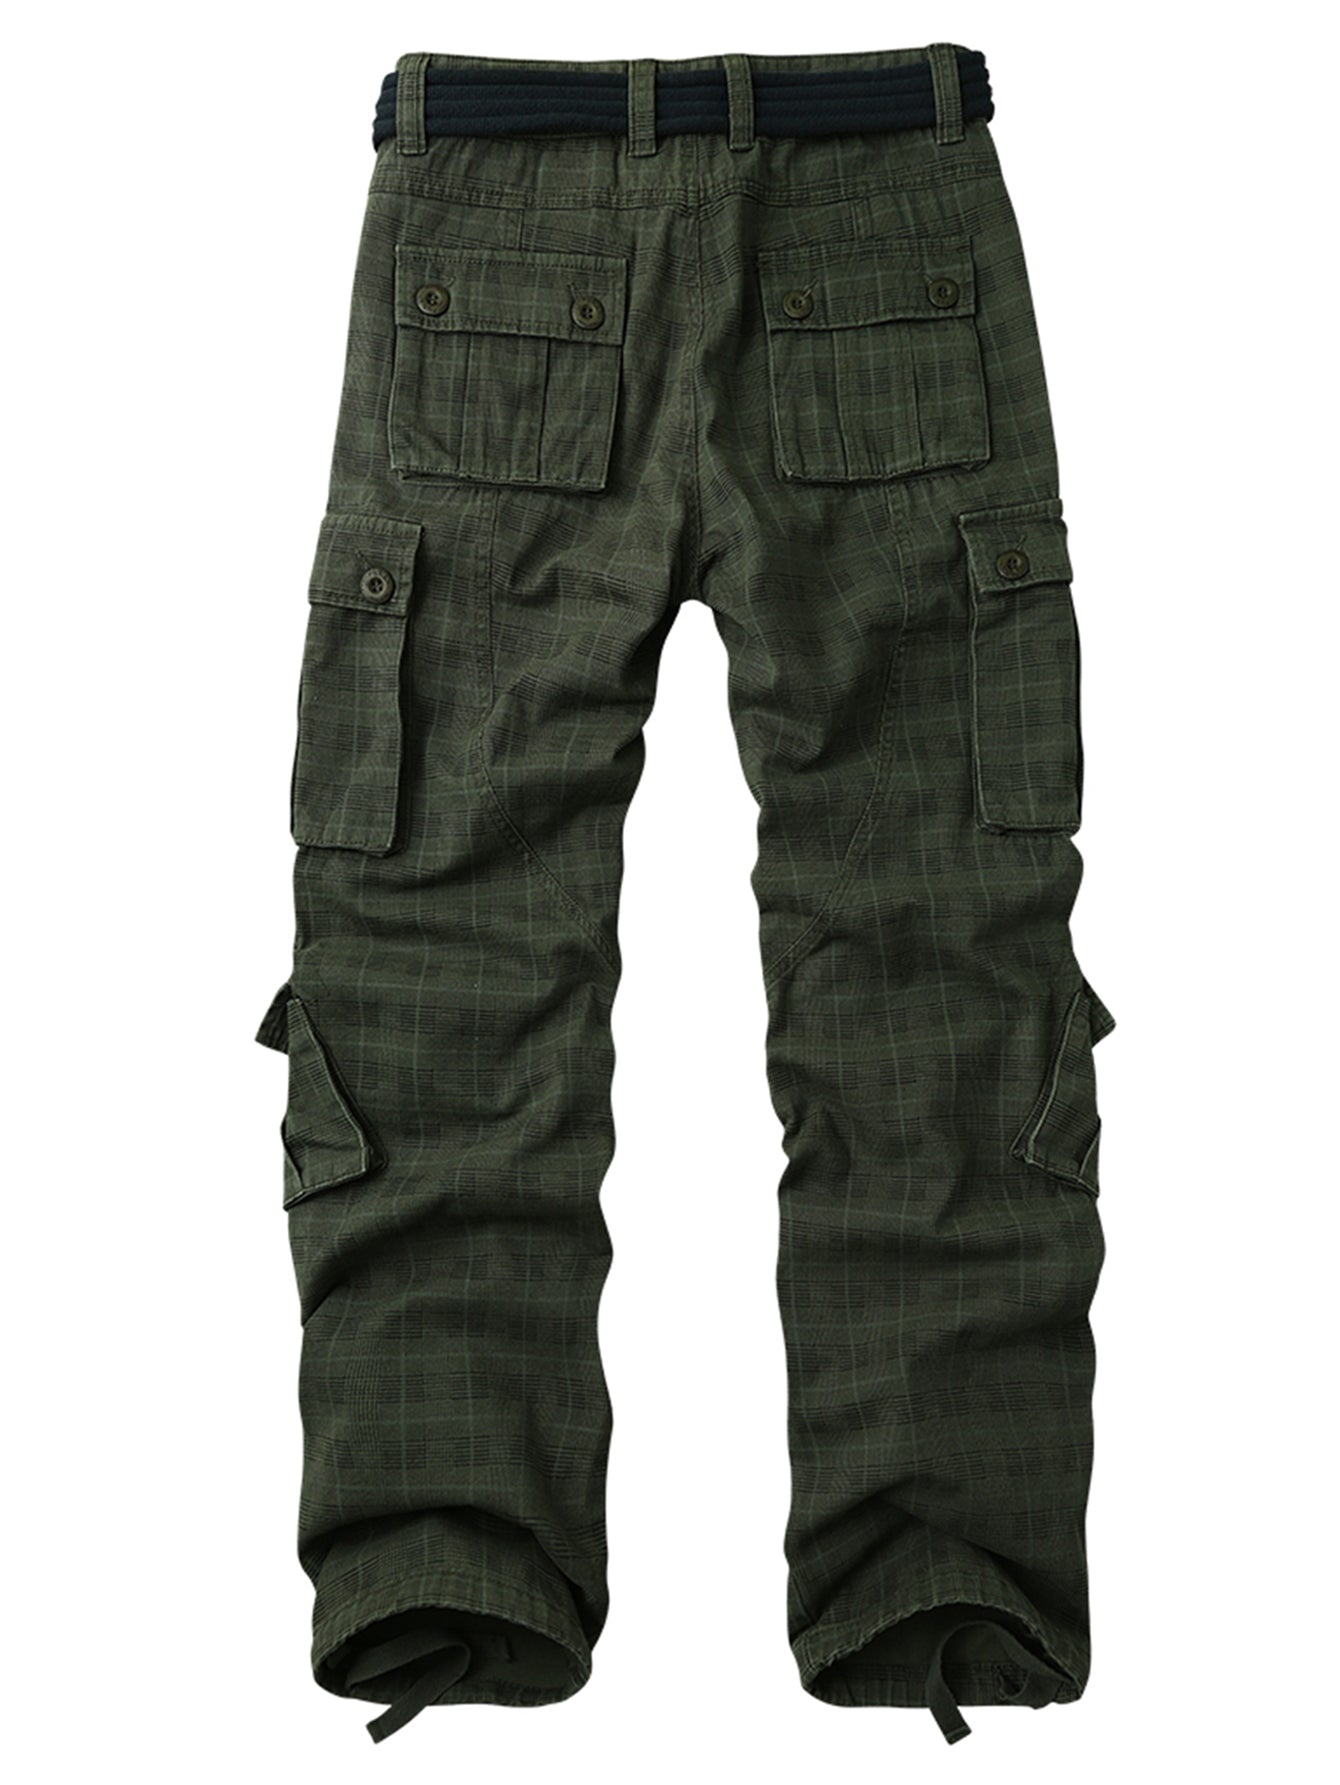 TRGPSG Men's Cargo Pants with 8 Pockets Cotton Cargo Work Pants(No